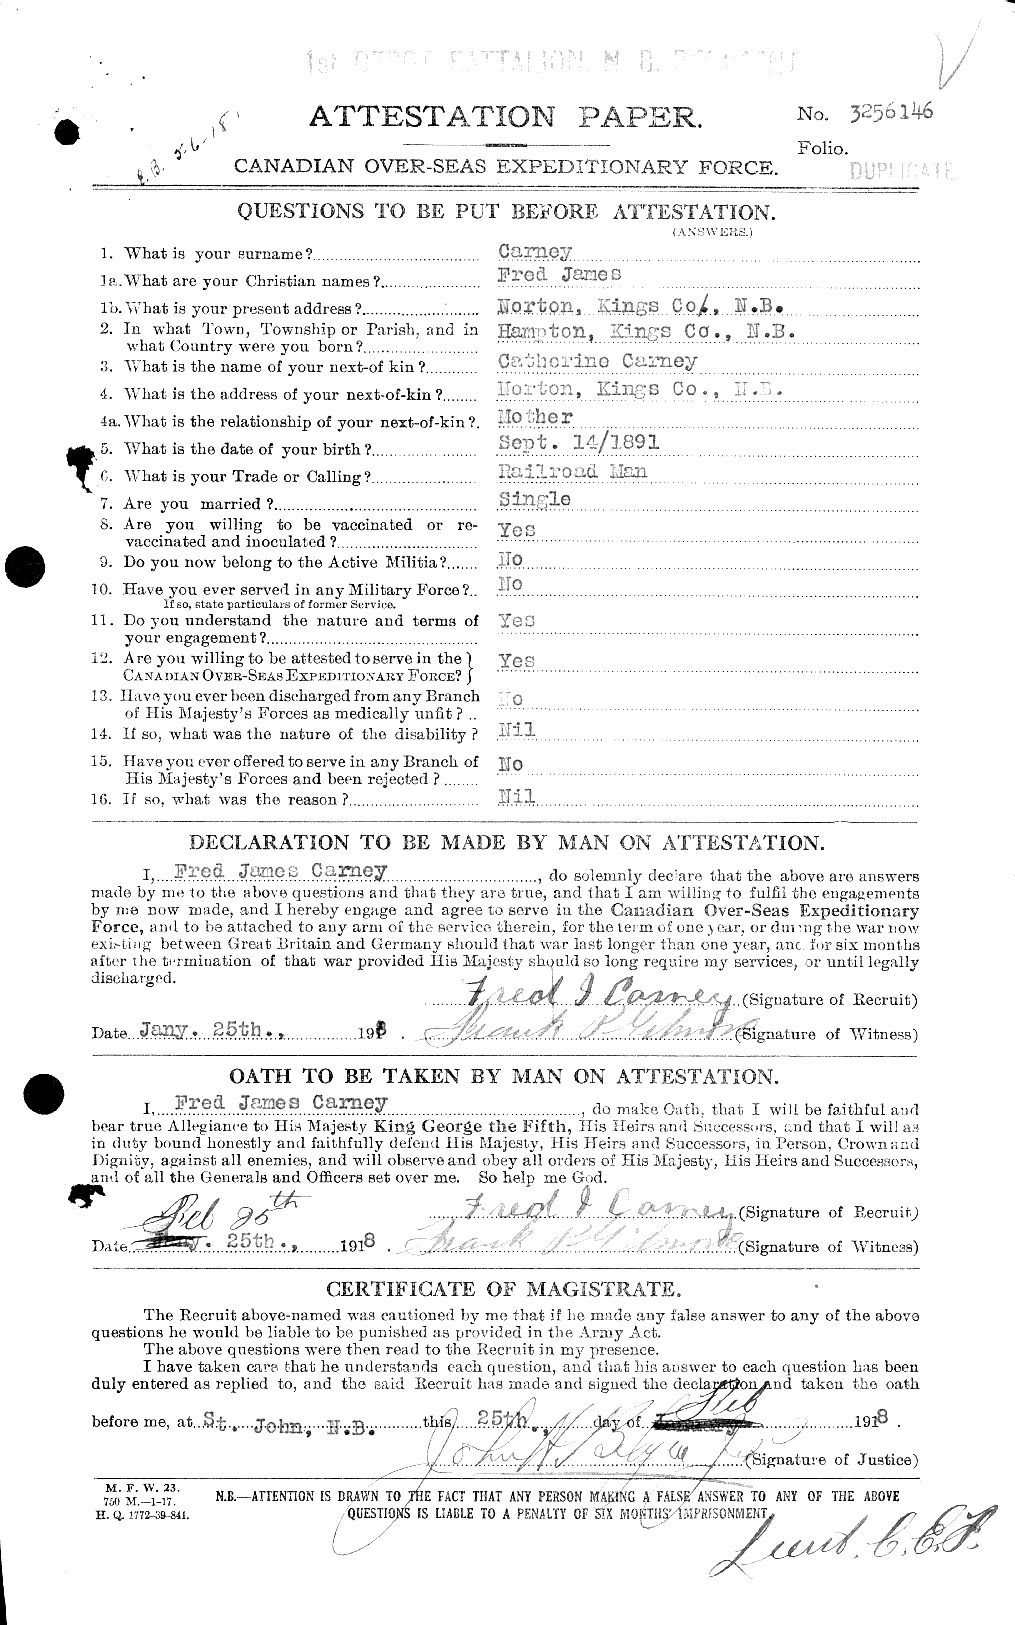 Personnel Records of the First World War - CEF 009961a